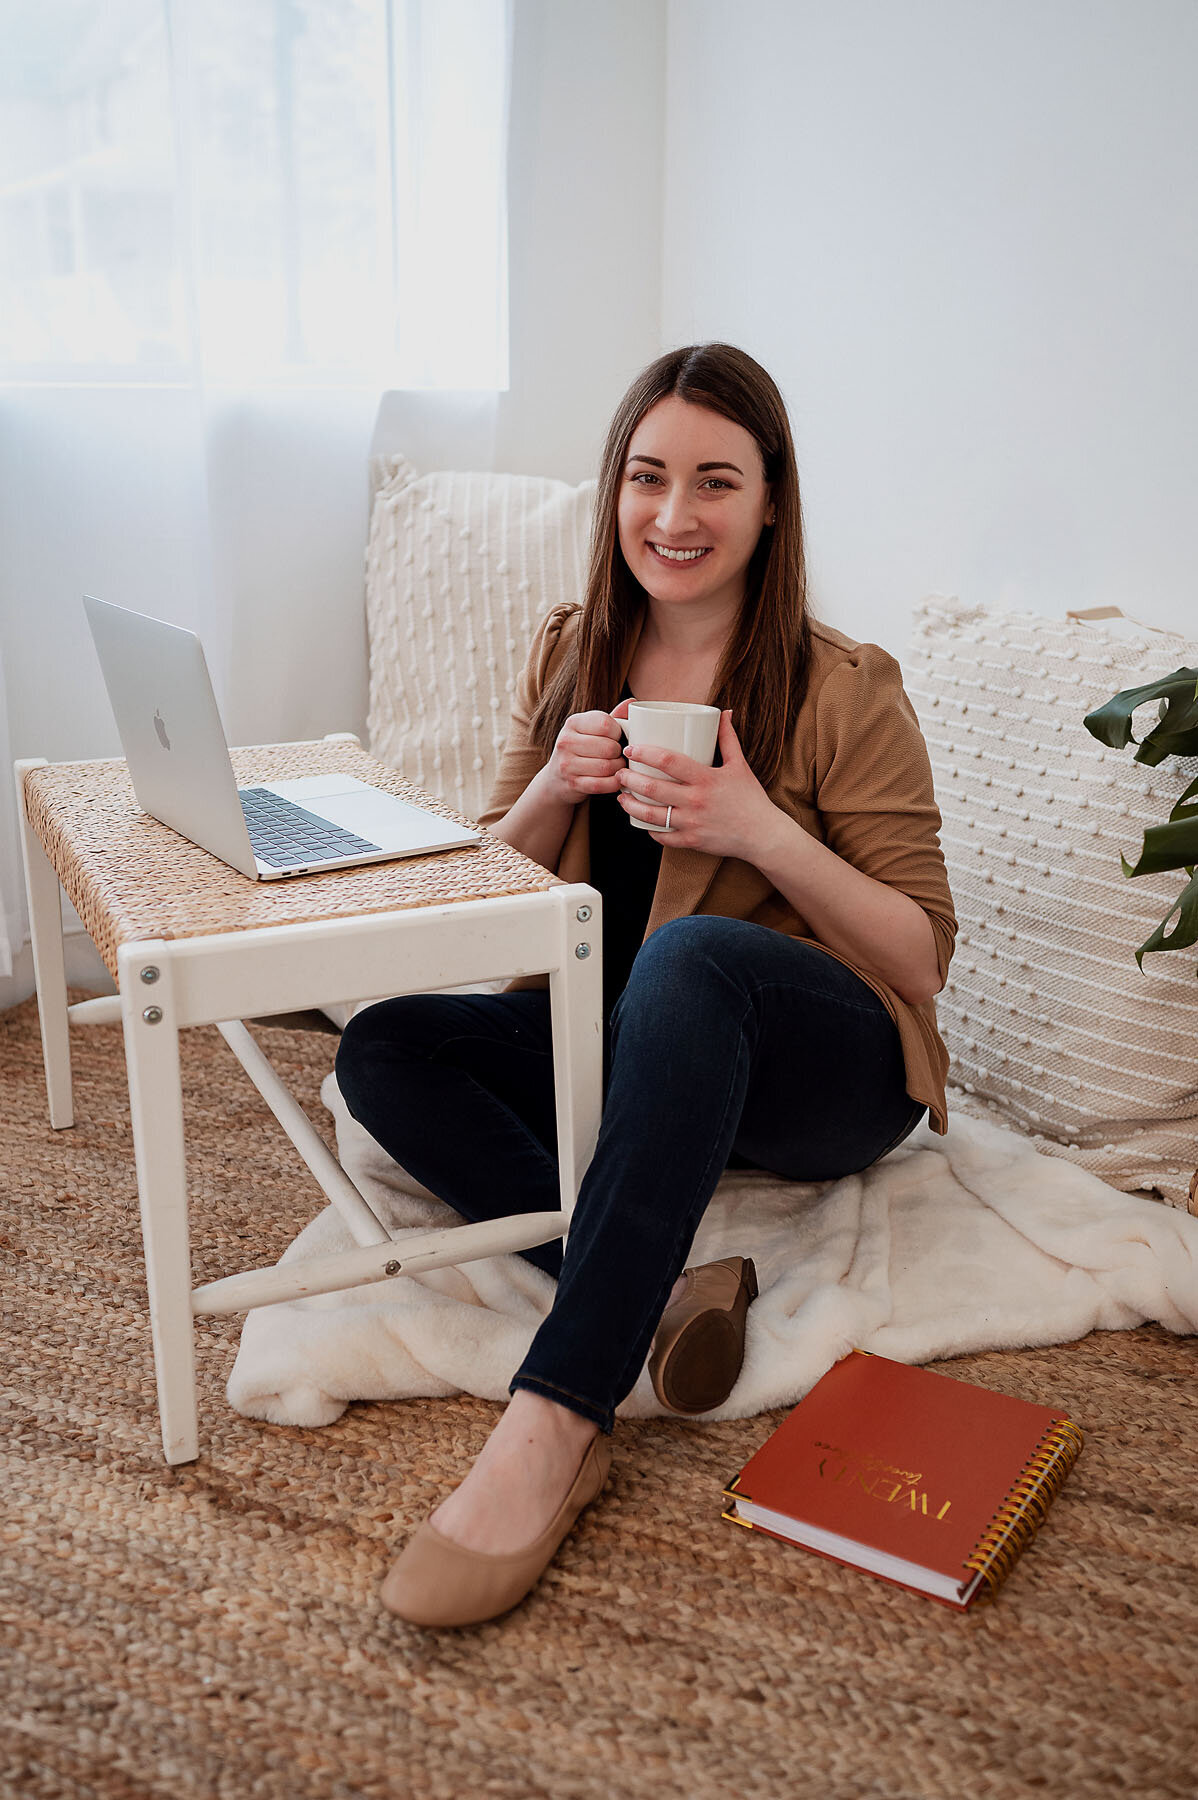 Creative business owner sitting on floor of studio with laptop and drinking a cup of coffee